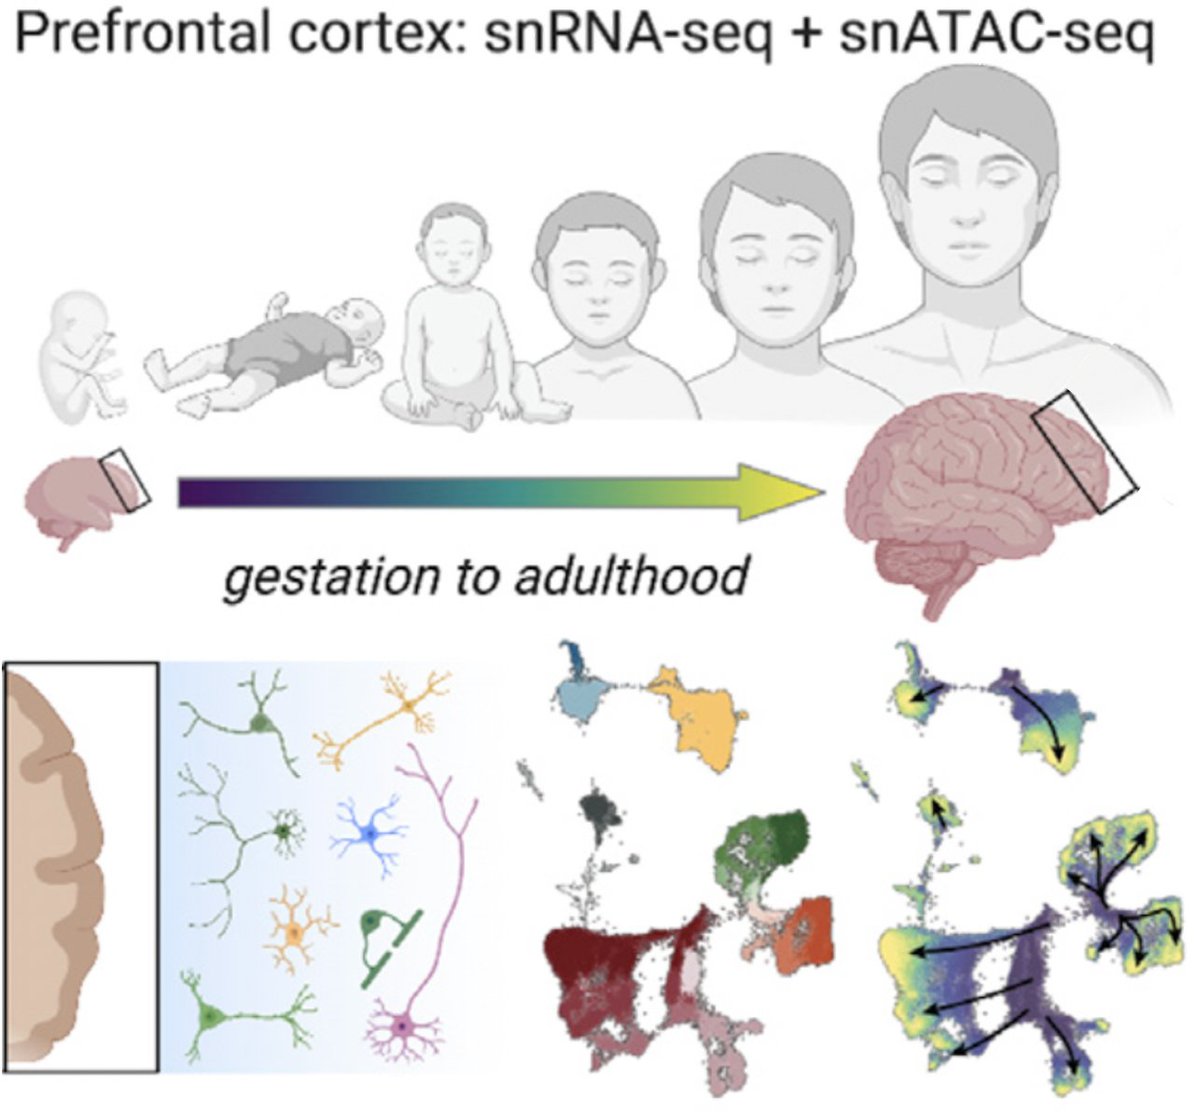 Excited to share our work on human prefrontal cortex, using single nuclei RNA and ATAC to cover development from fetal into adulthood! doi.org/10.1016/j.cell… Great team work with @Chuck_Herring, twitterless Becca Simmons, @SaskiaFreytag and @ry_Lister.